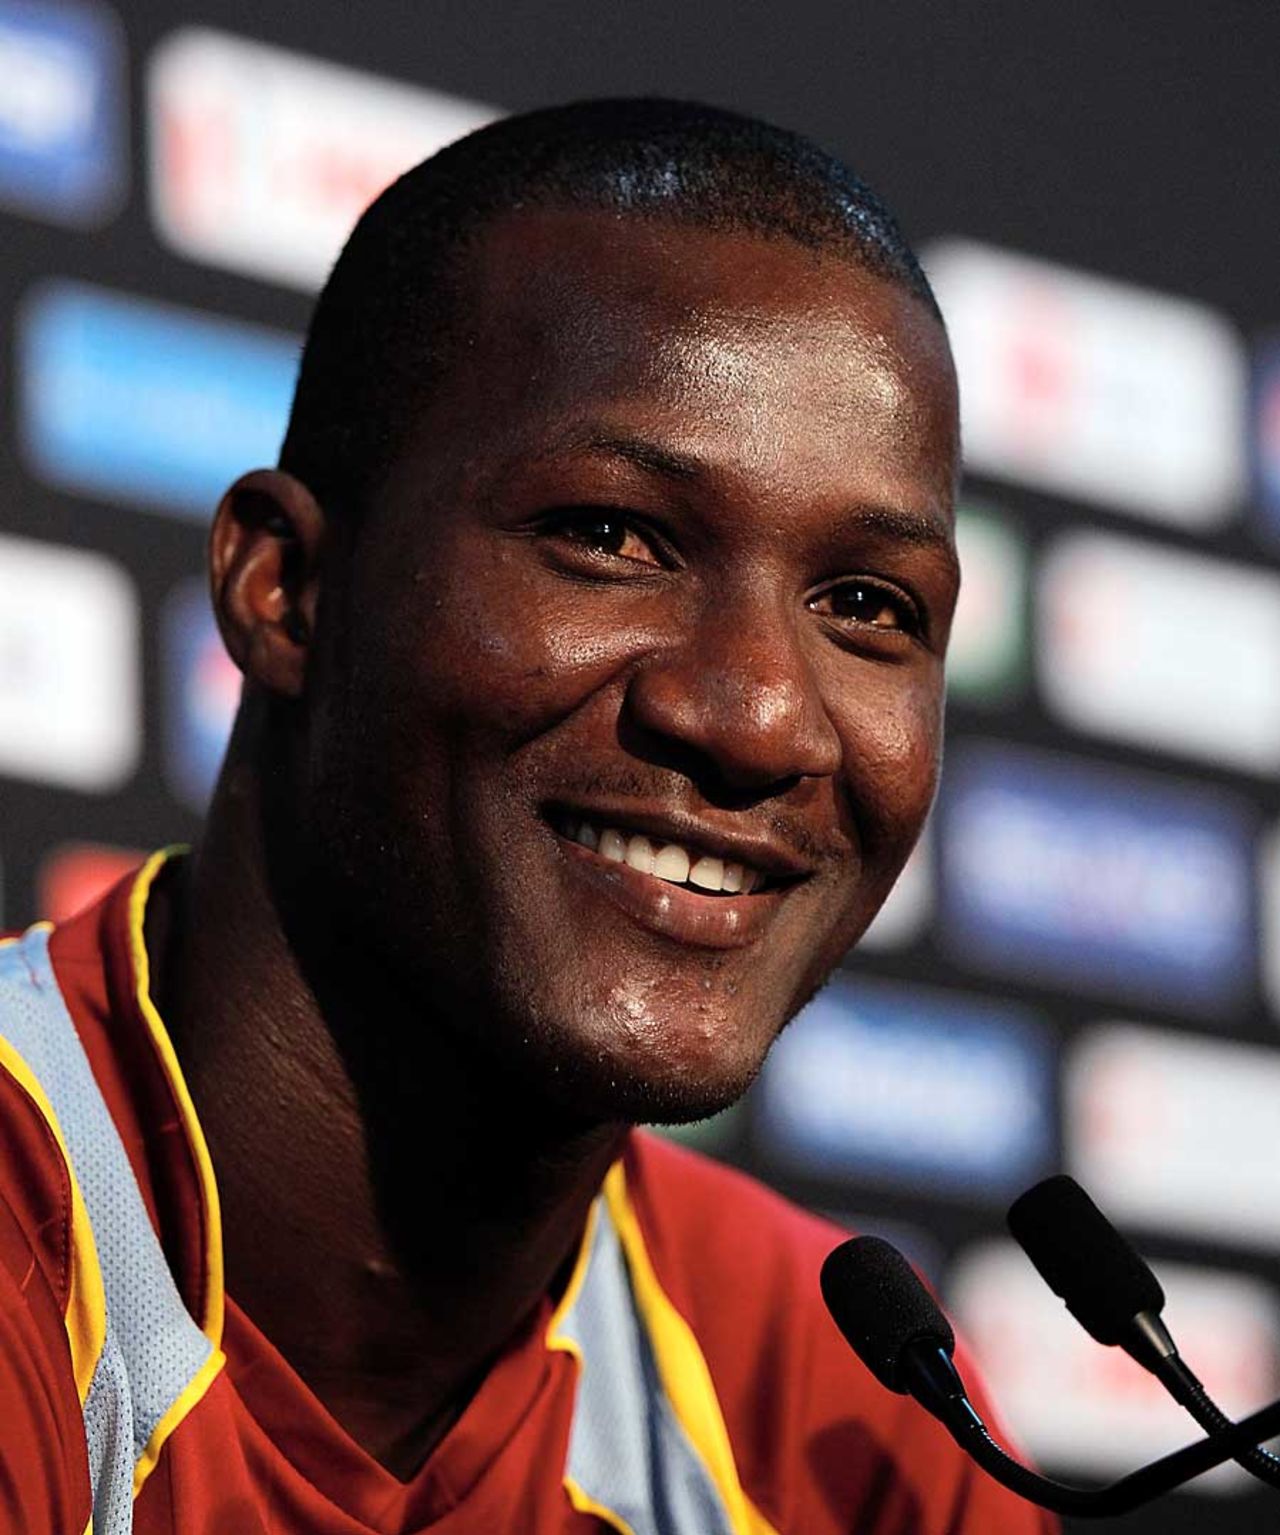 Darren Sammy at the pre-match press conference in Colombo, Colombo, October 6, 2012